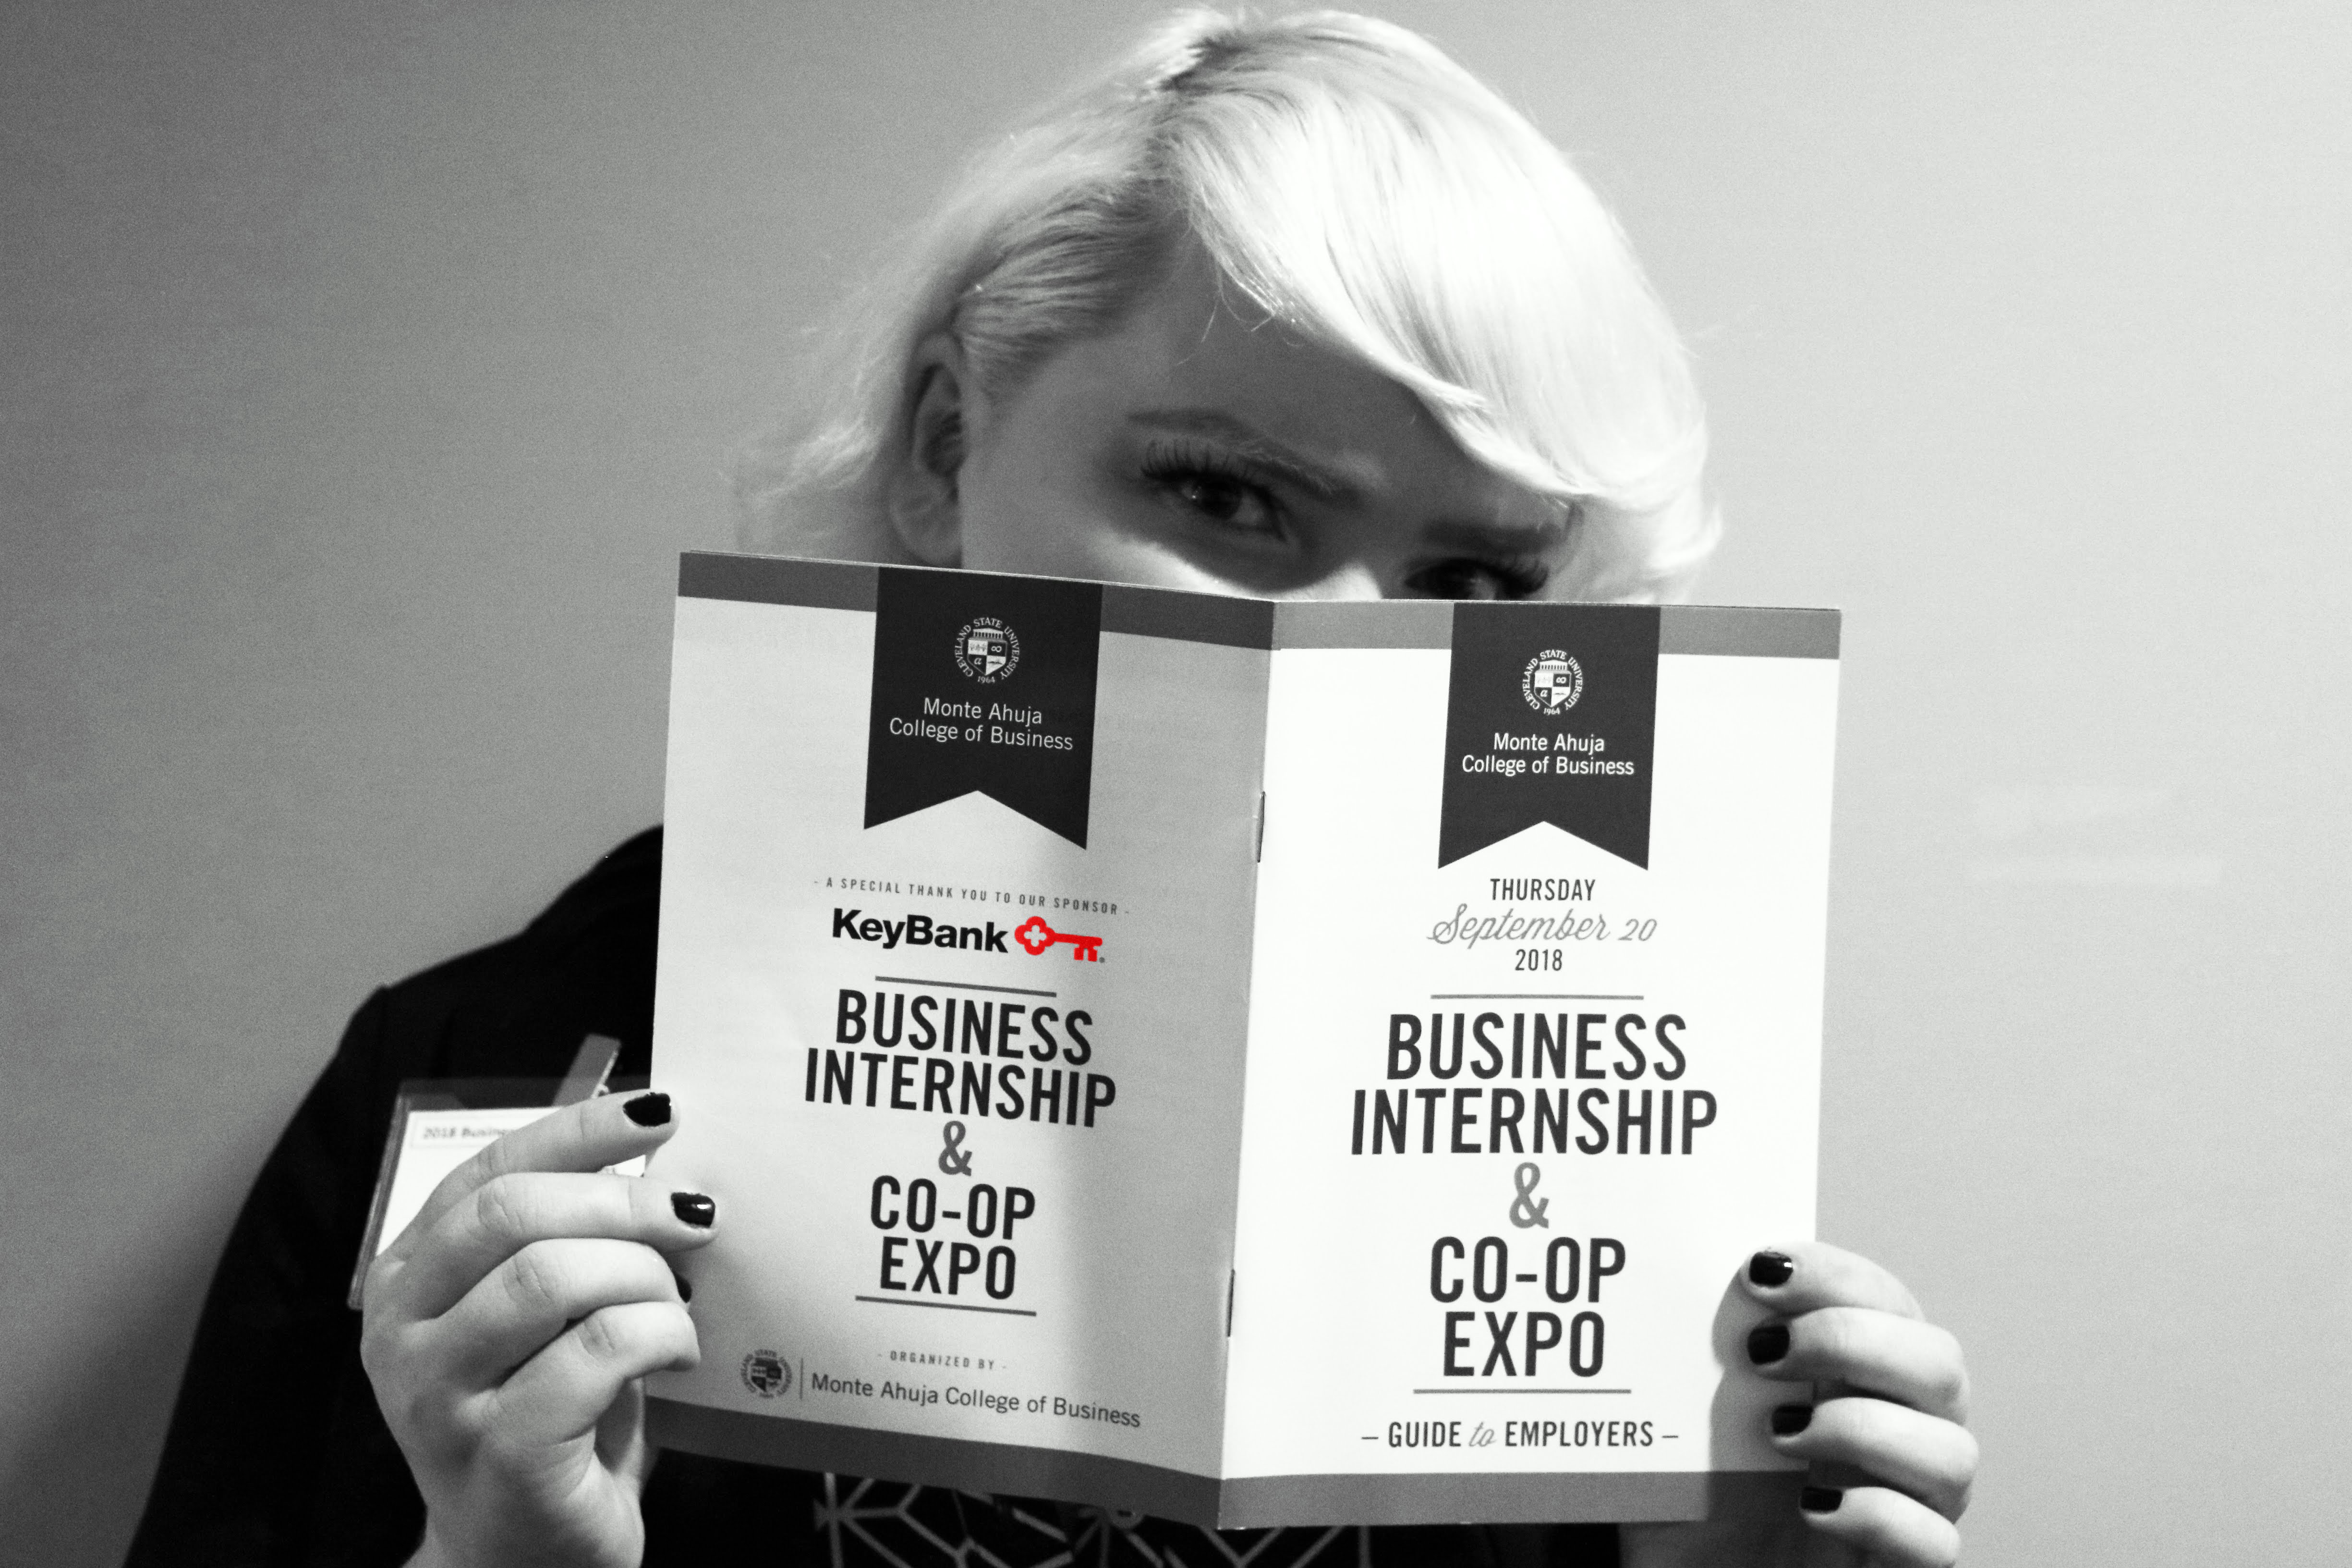 Business Internship & Co-op Expo 2018 Guide to Employers Photo